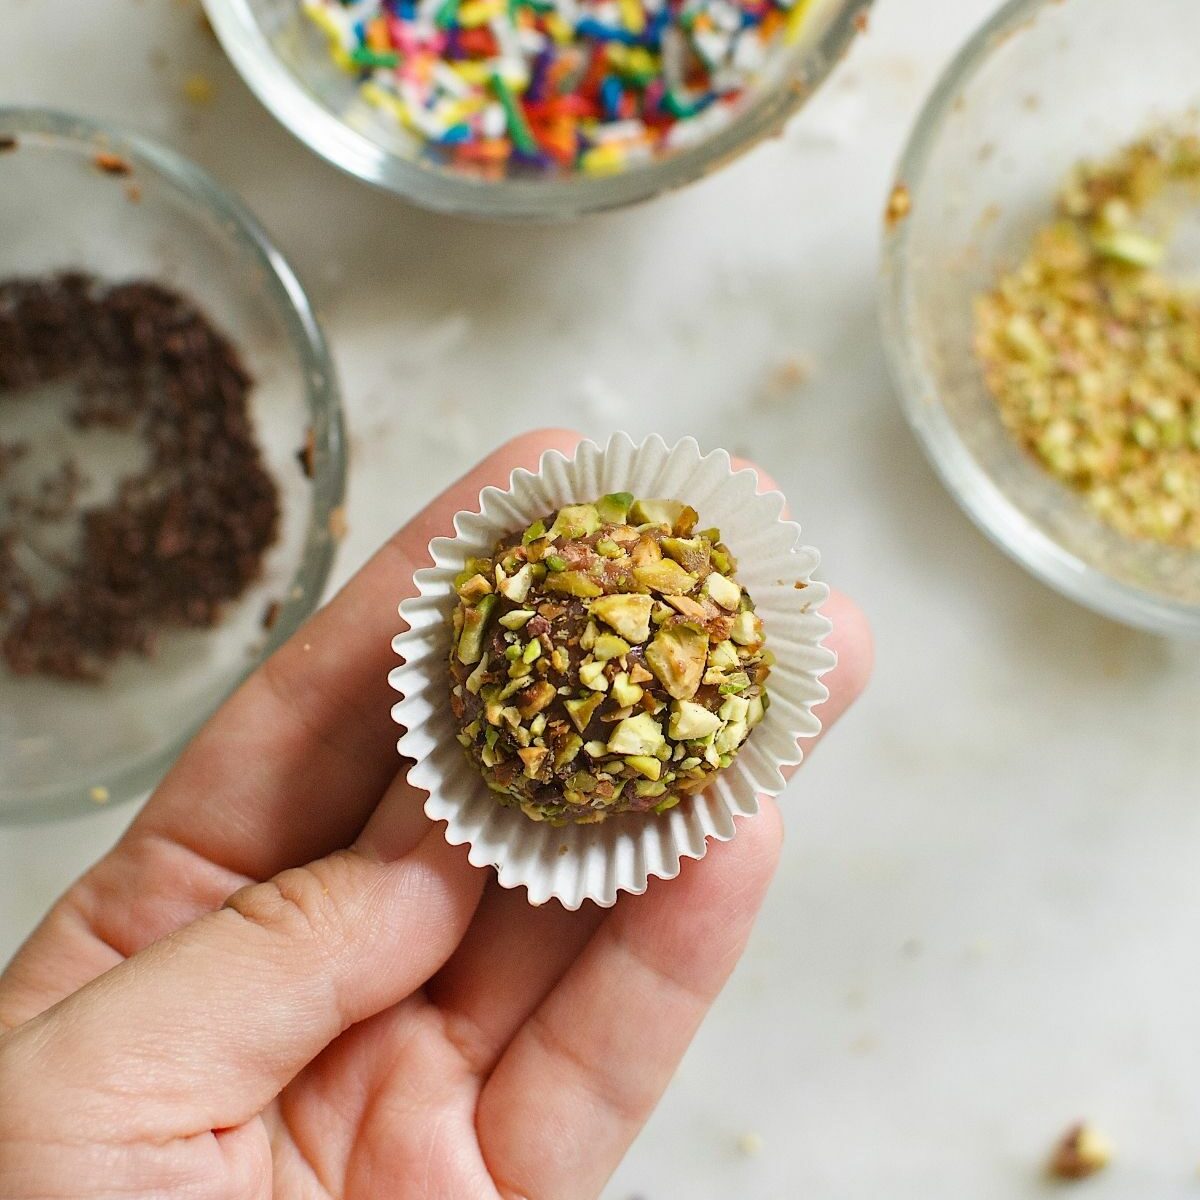 brigadeiro ball, coated with chopped nuts, in a mini cupcake liners.